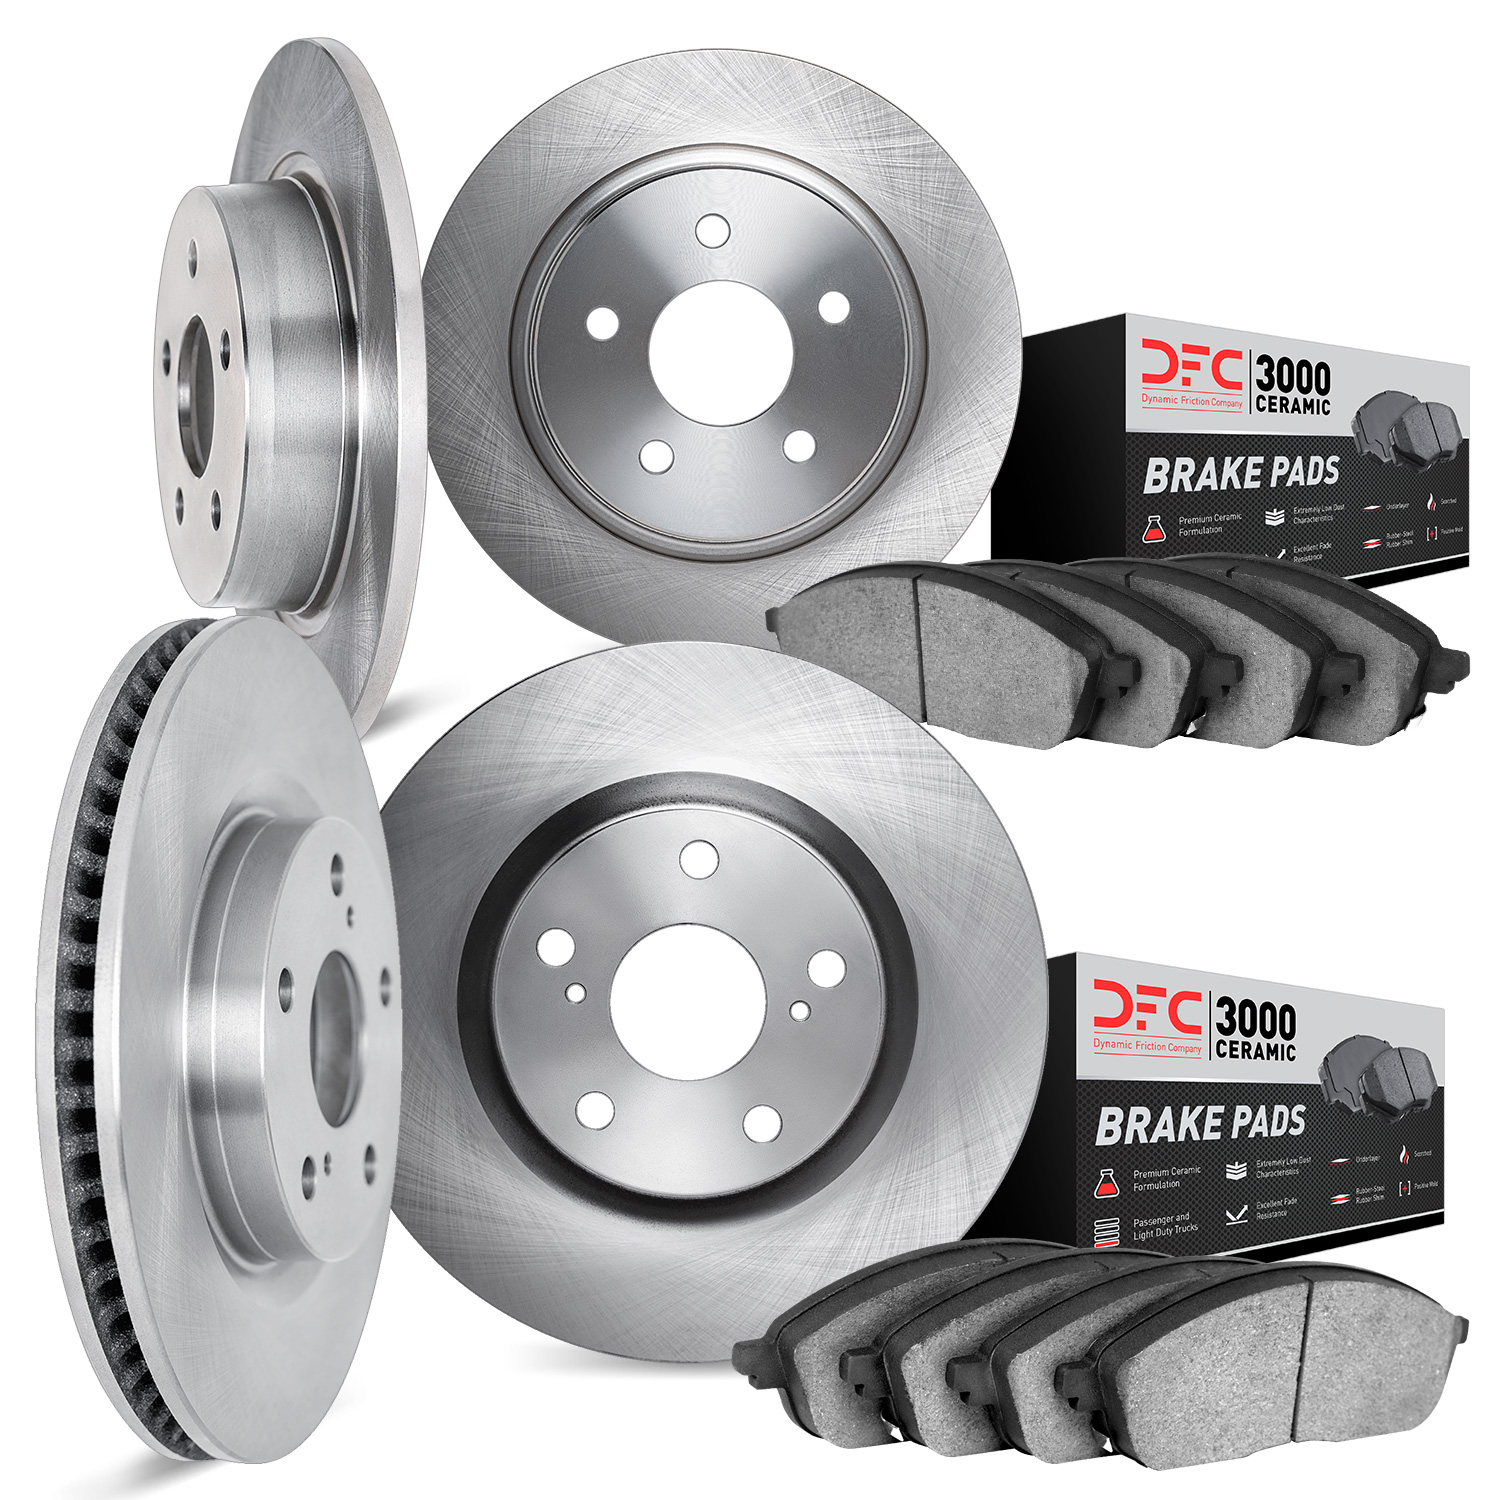 6304-76089 Brake Rotors with 3000-Series Ceramic Brake Pads Kit, 2007-2012 Lexus/Toyota/Scion, Position: Front and Rear